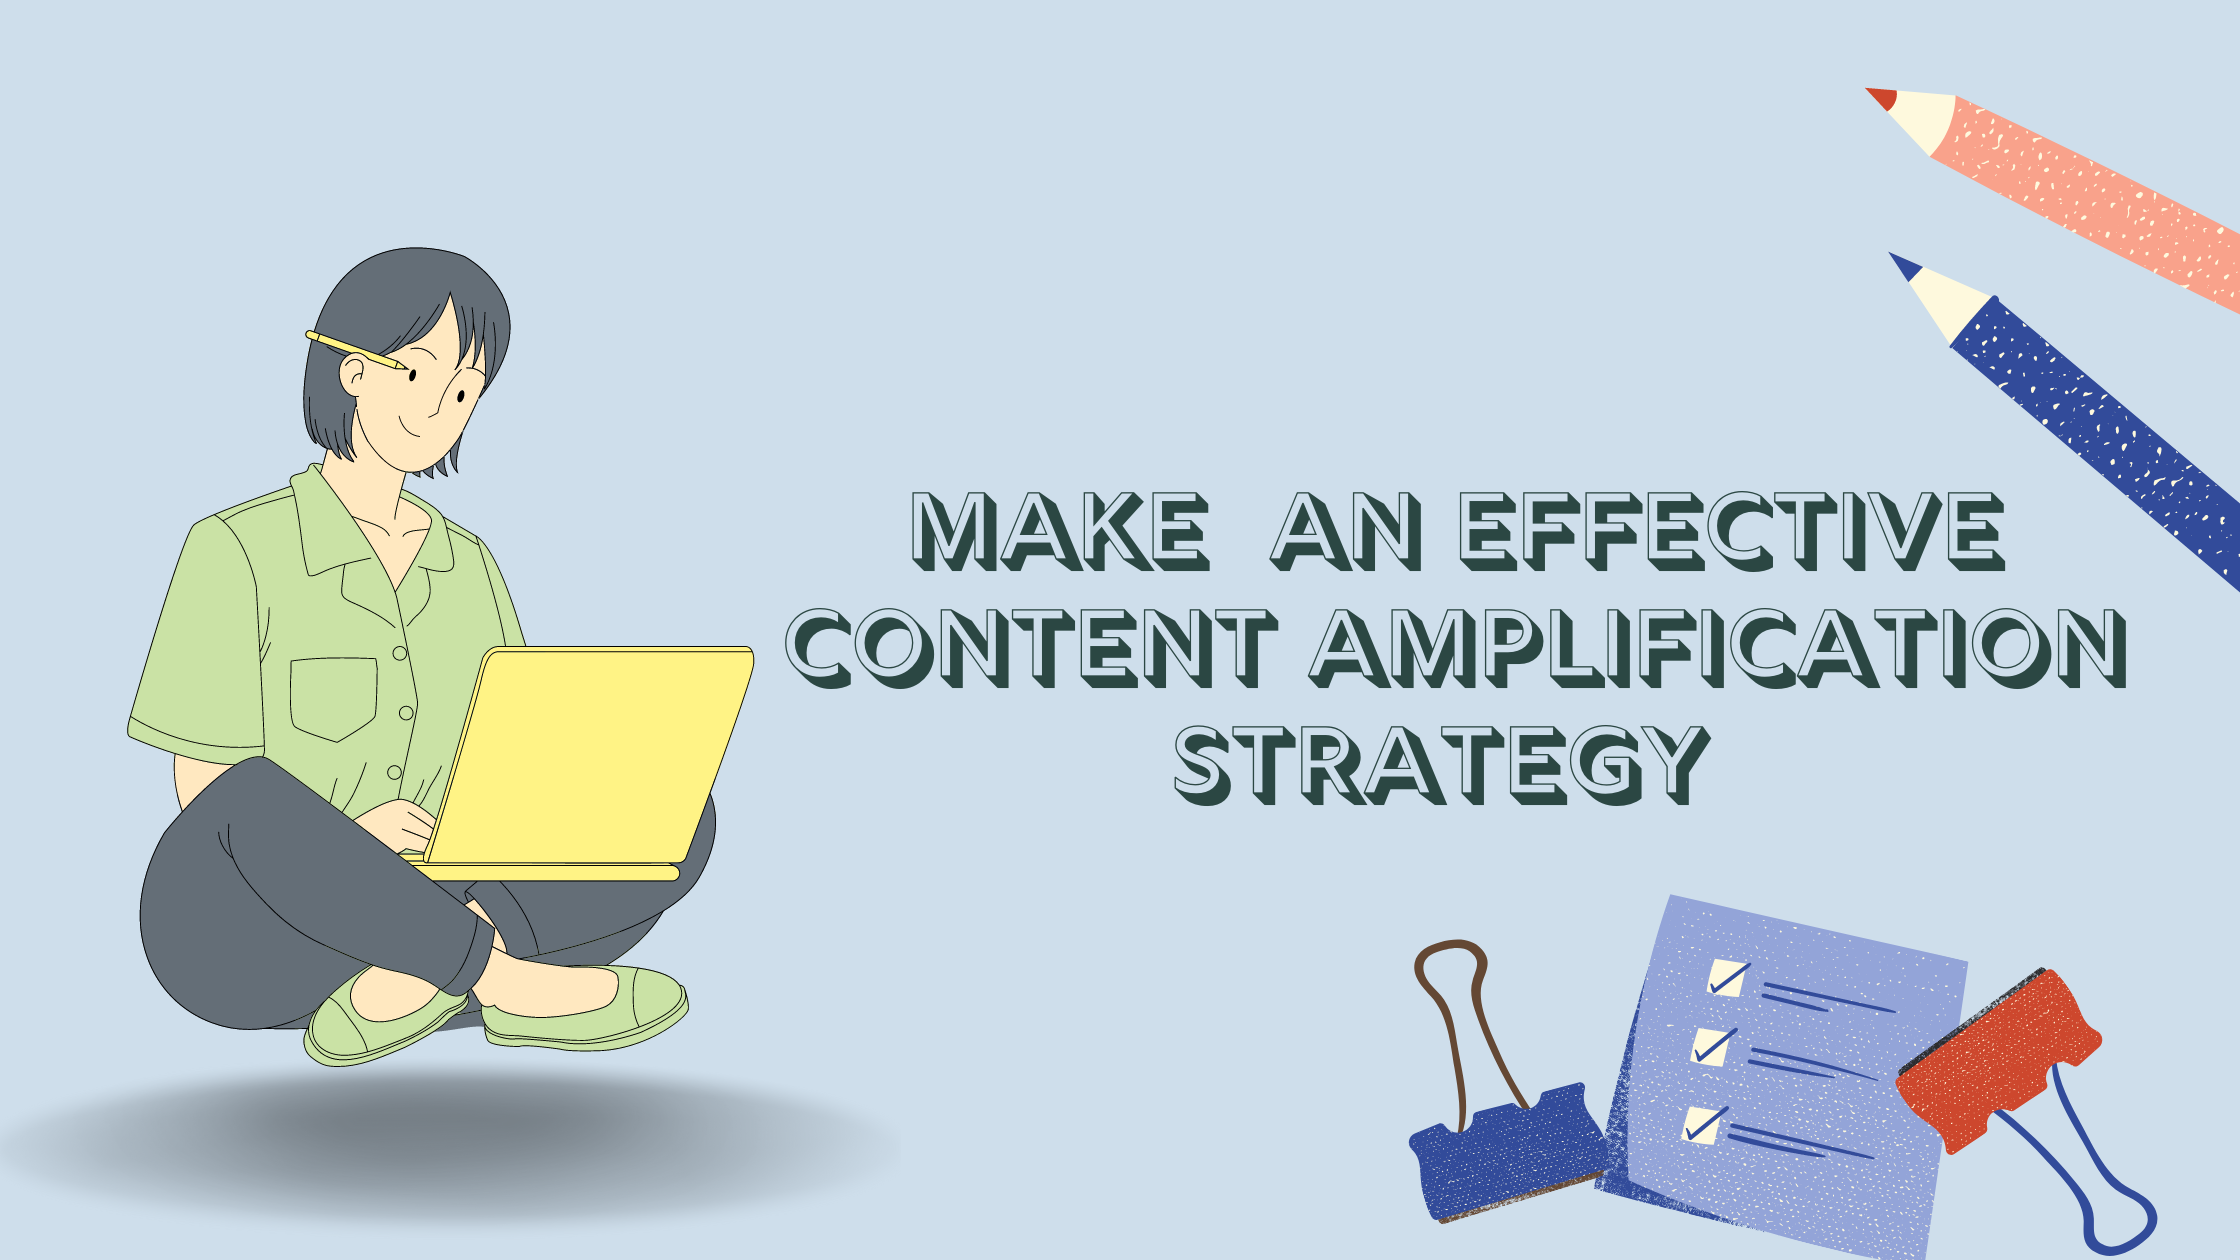 Make The Most Out Of Content With An Effective Content Amplification Strategy